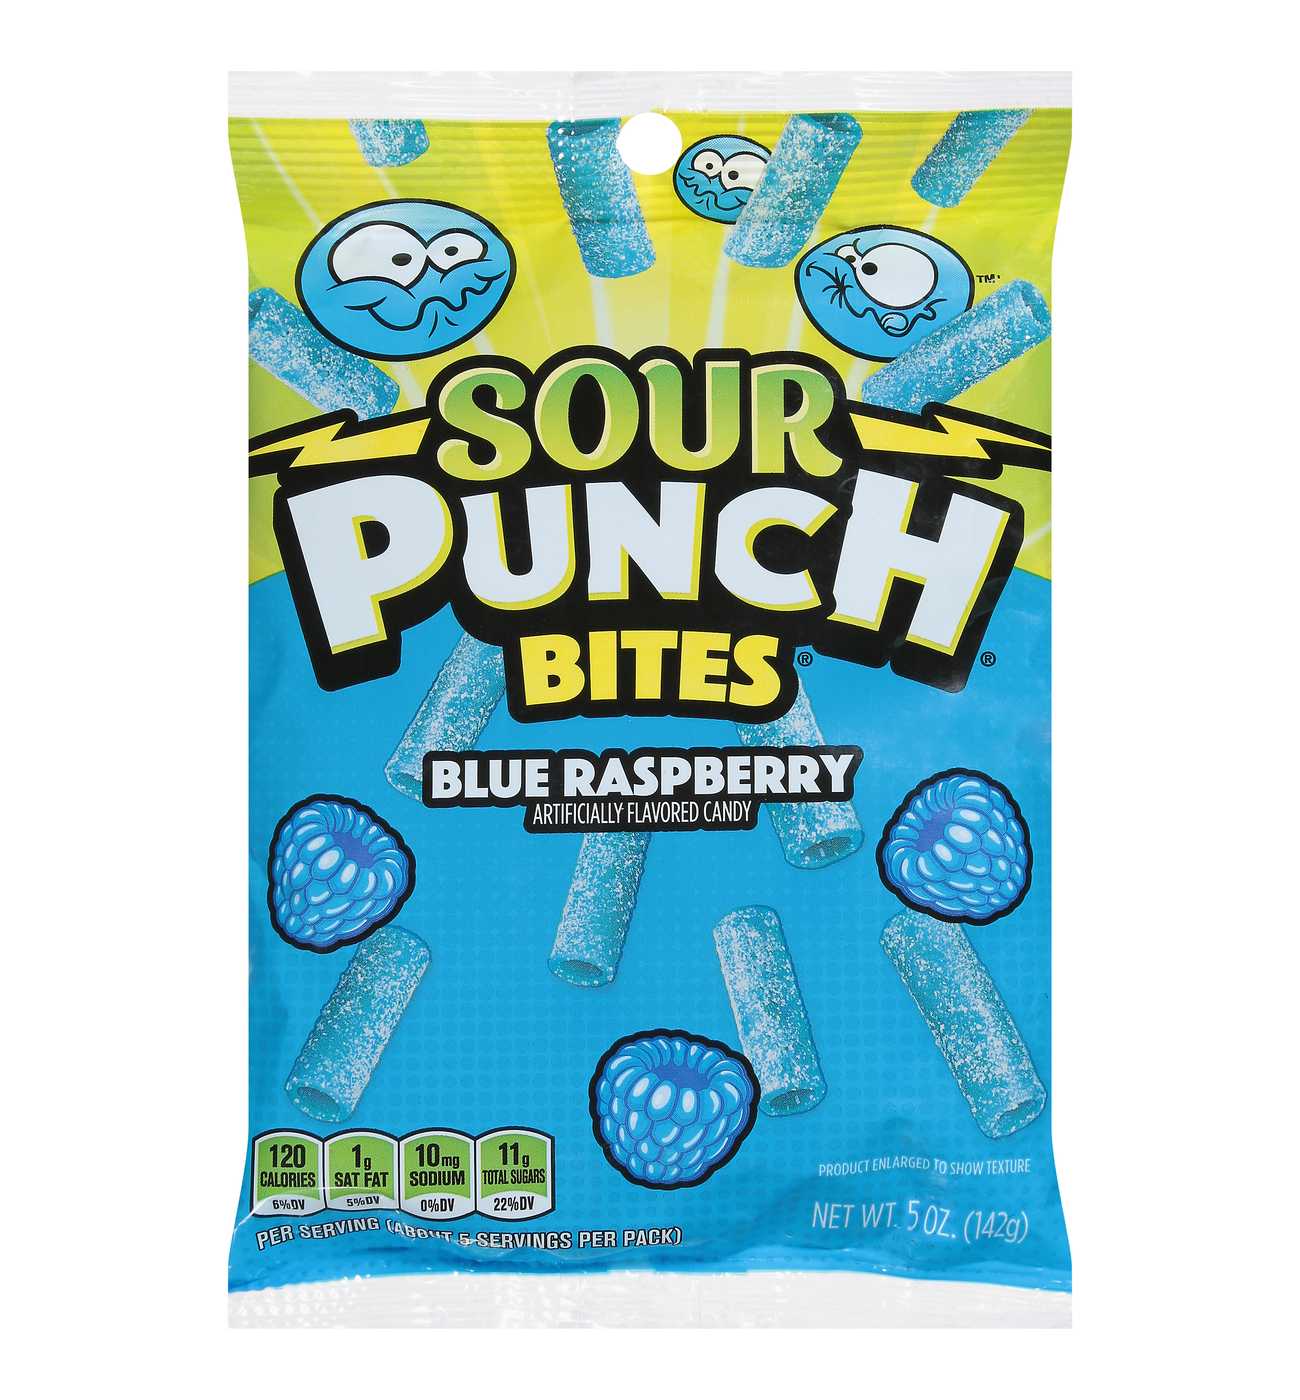 Sour Punch Bites Blue Raspberry Gummy Candy; image 1 of 4